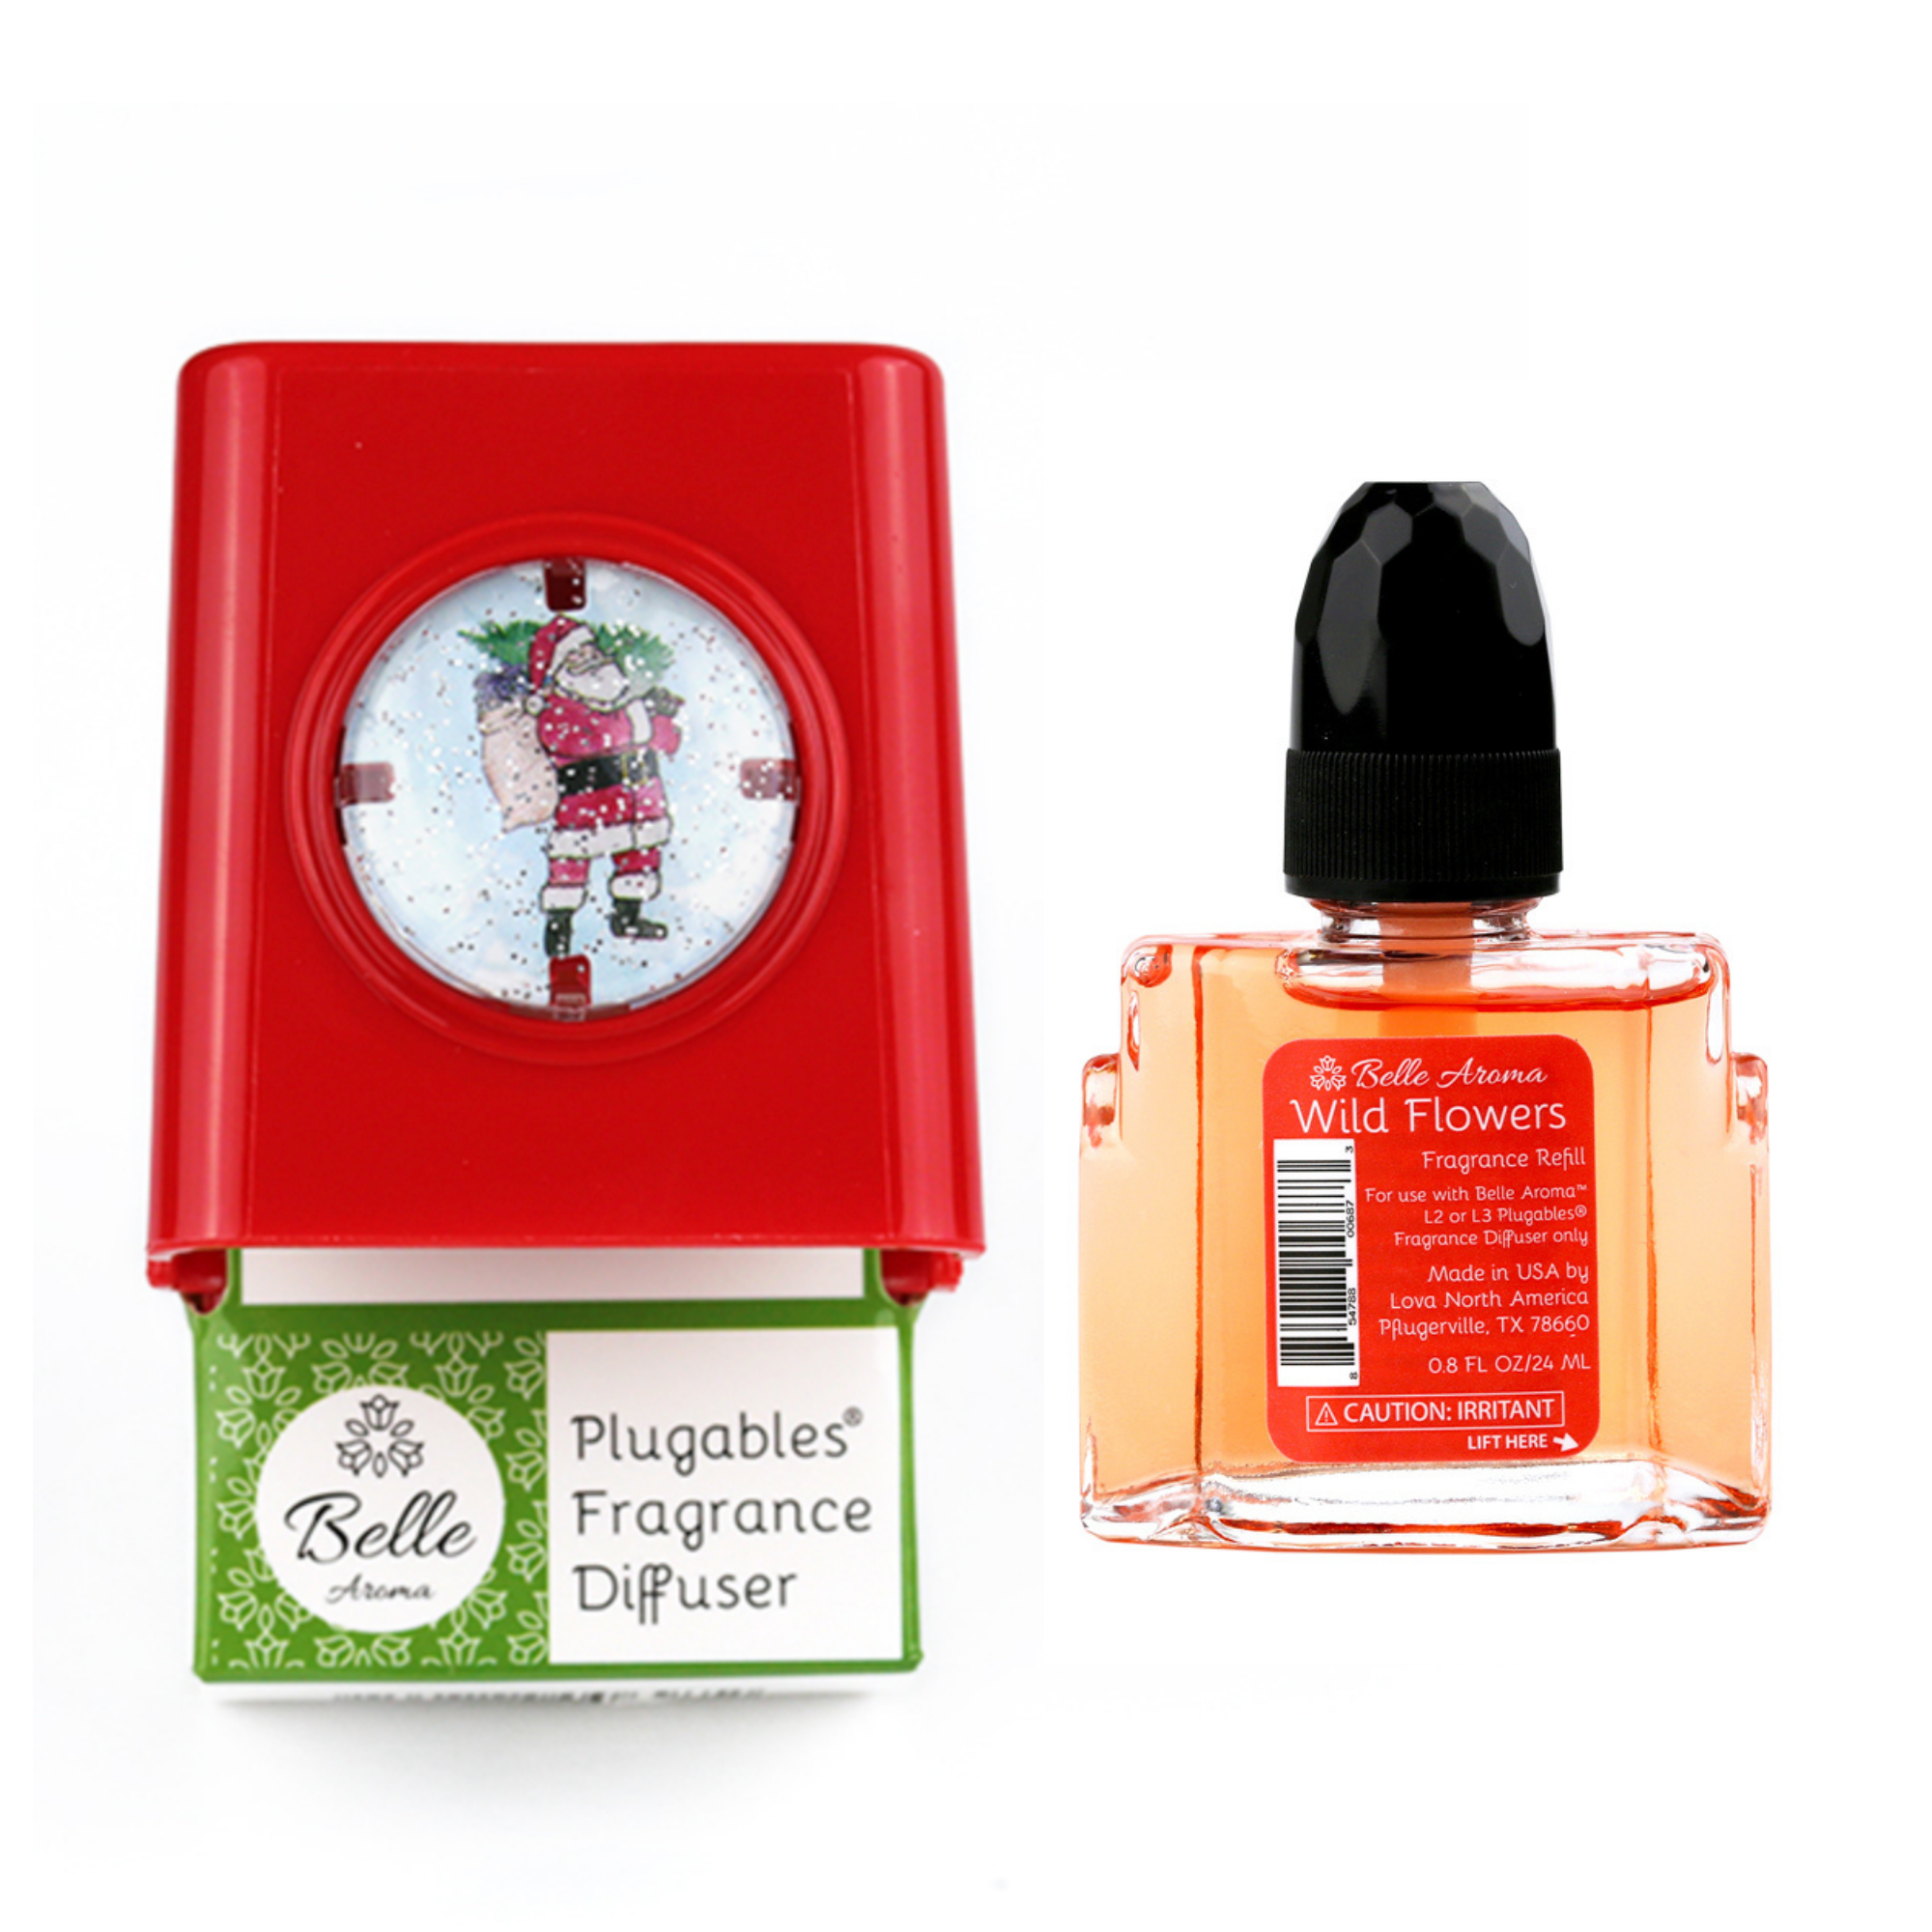 Glitter Domes™ Plugables® Electric Scented Oil Diffuser - Santa with Wild Flowers Fragrance Oil Home Fragrance Accessories